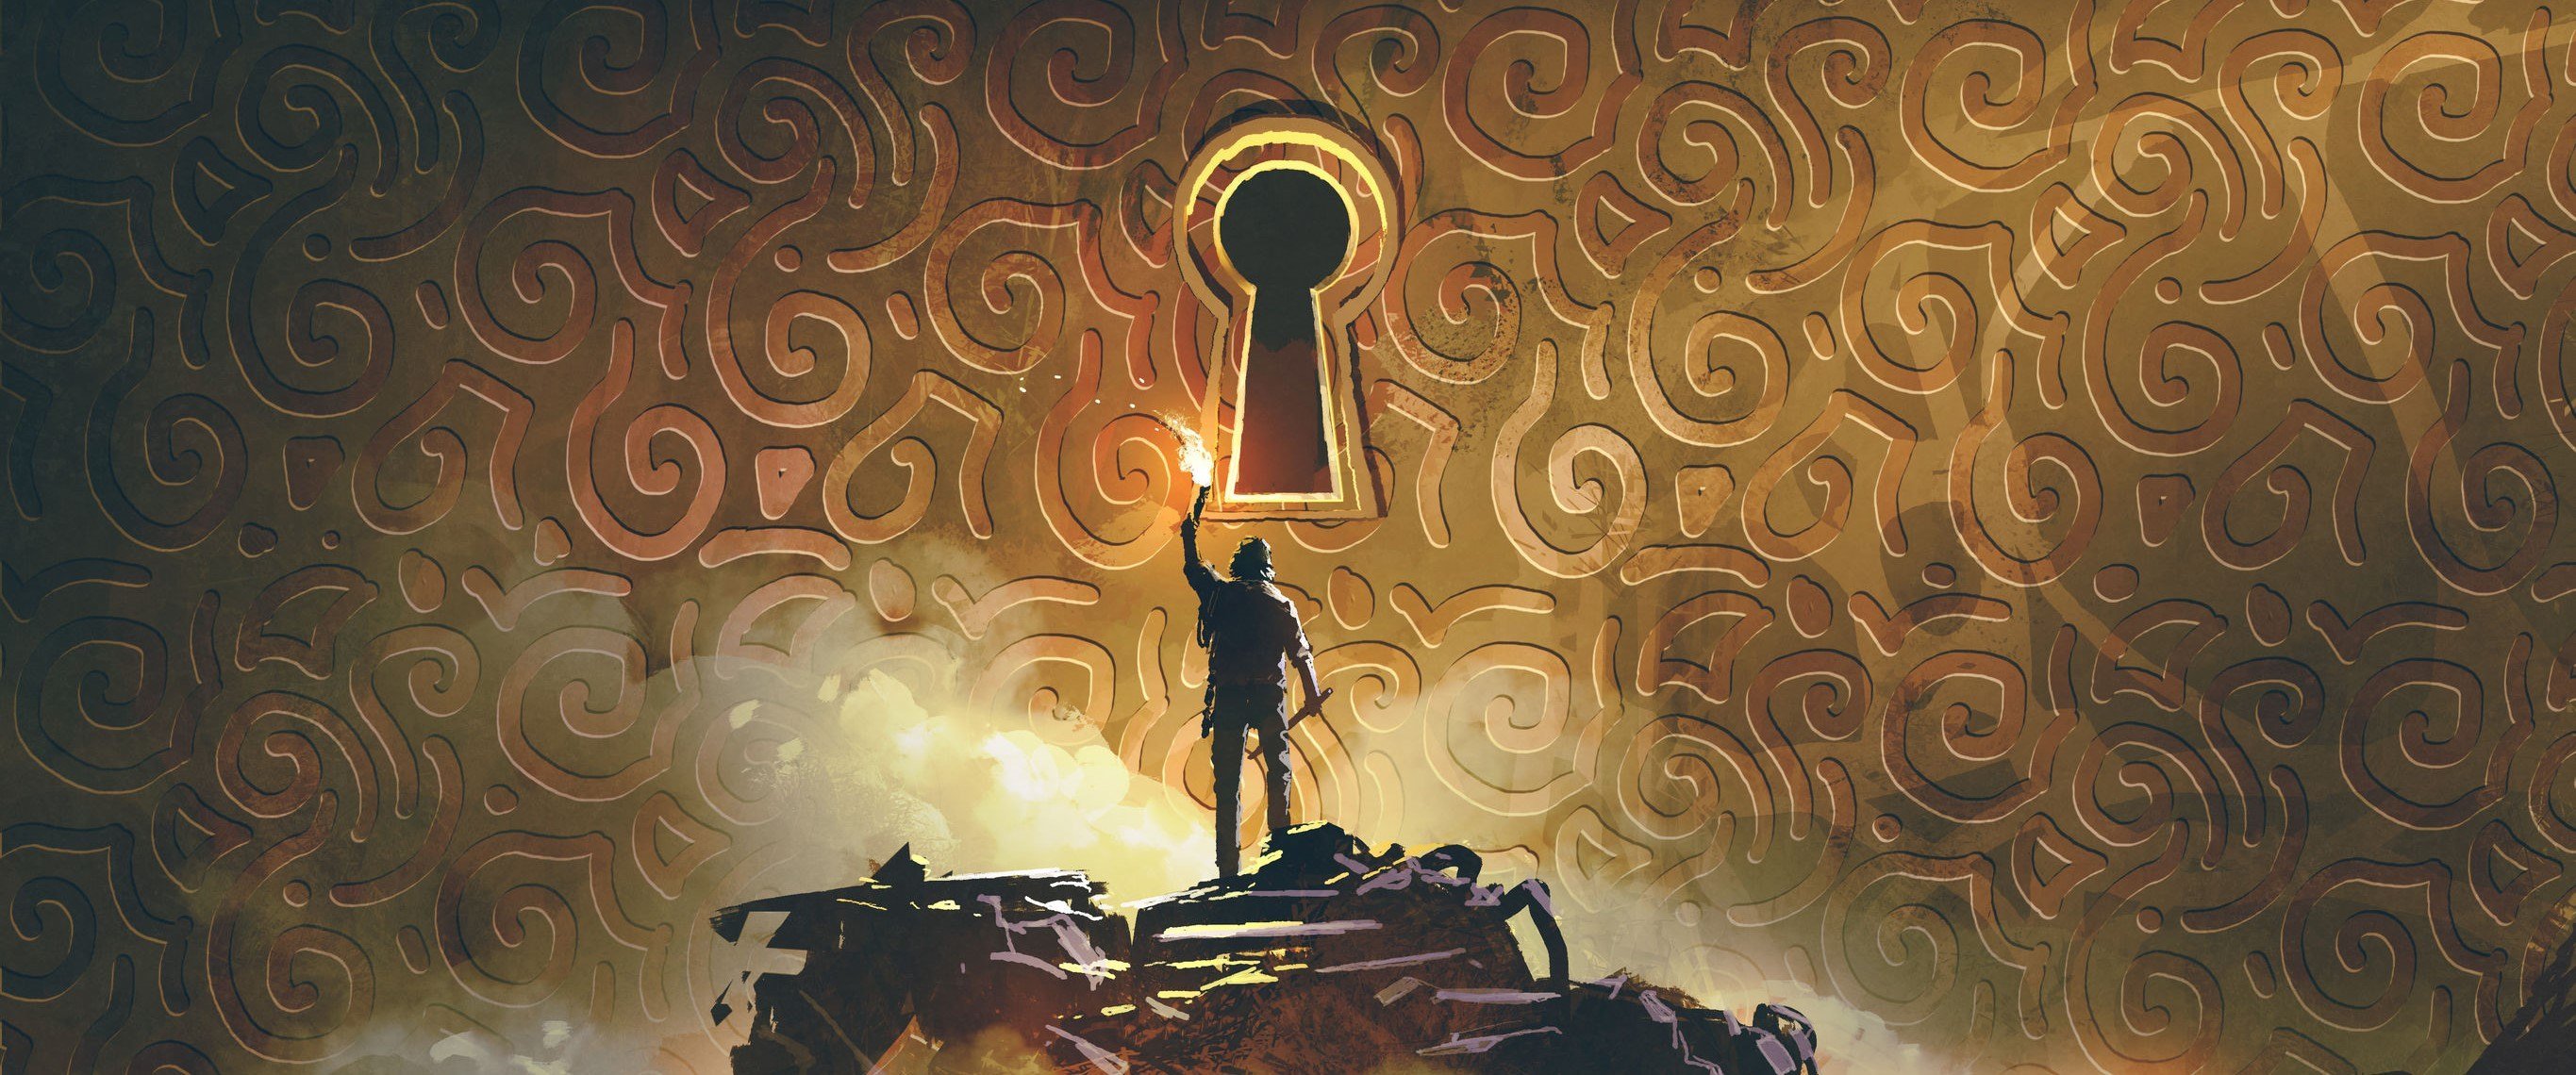 the adventure man with a torch standing and looking at a large keyhole on the brass wall, digital art style, illustration painting